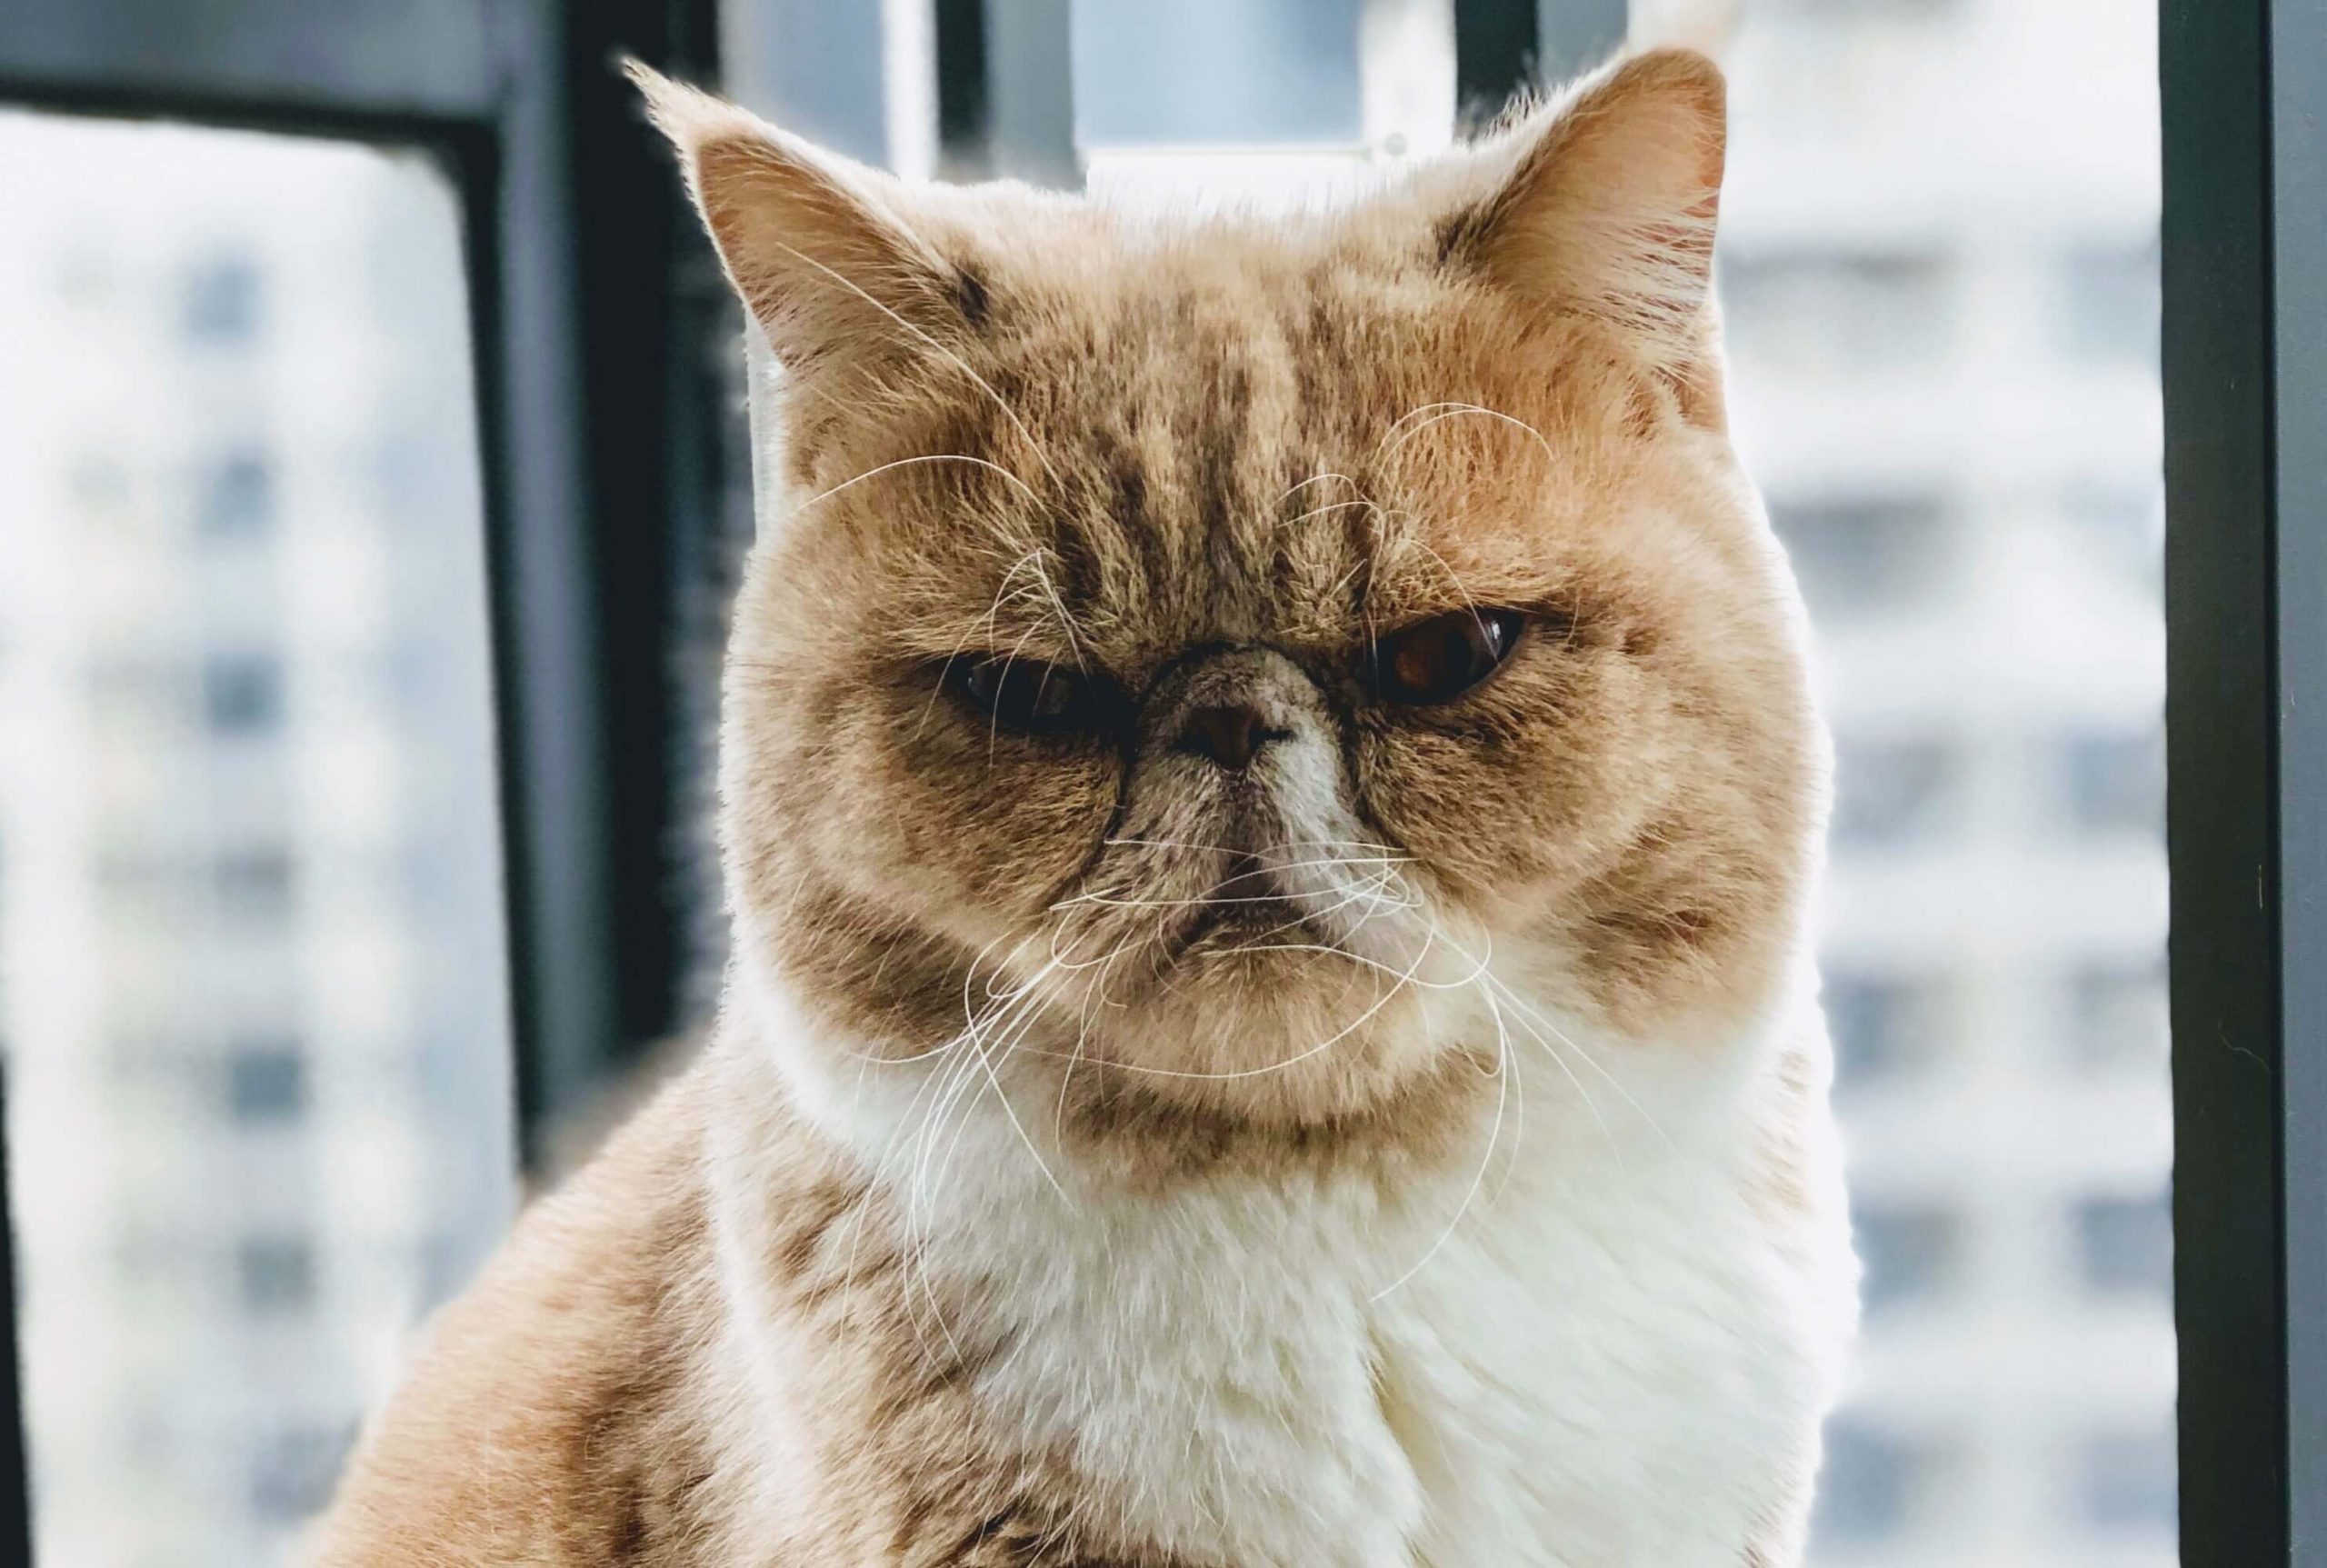 Angry face of a light colored cat